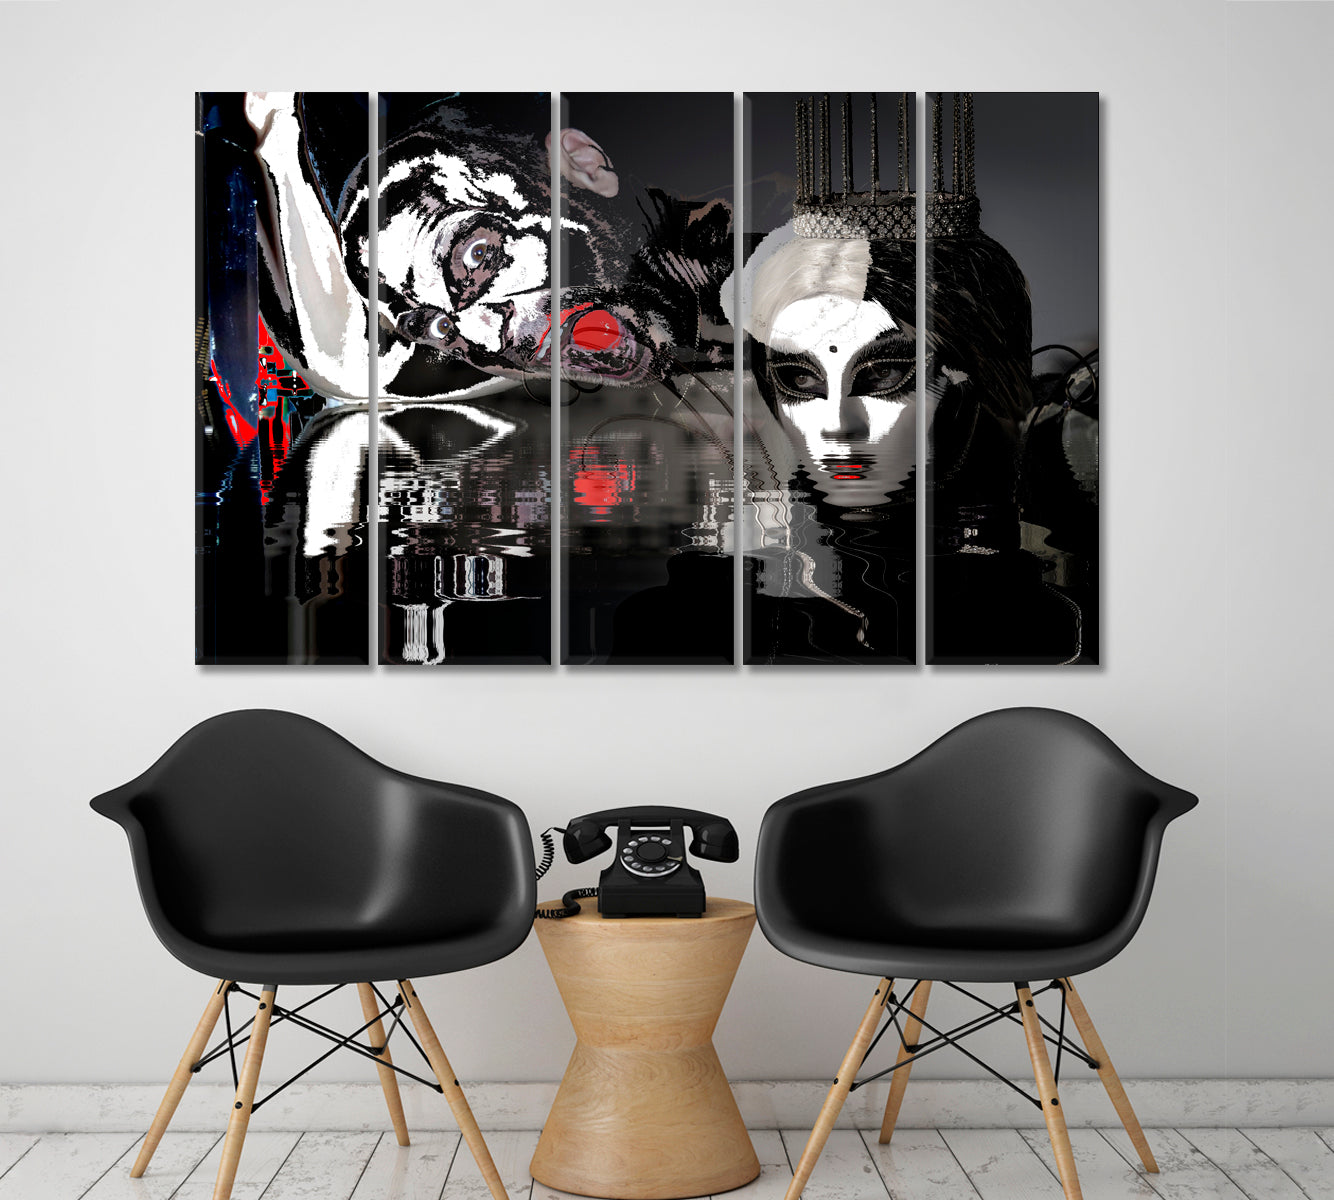 Mysterious Glamour Princess White Mask Crown Screaming Man Surreal Art Surreal Fantasy Large Art Print Décor Artesty 5 panels 36" x 24" 